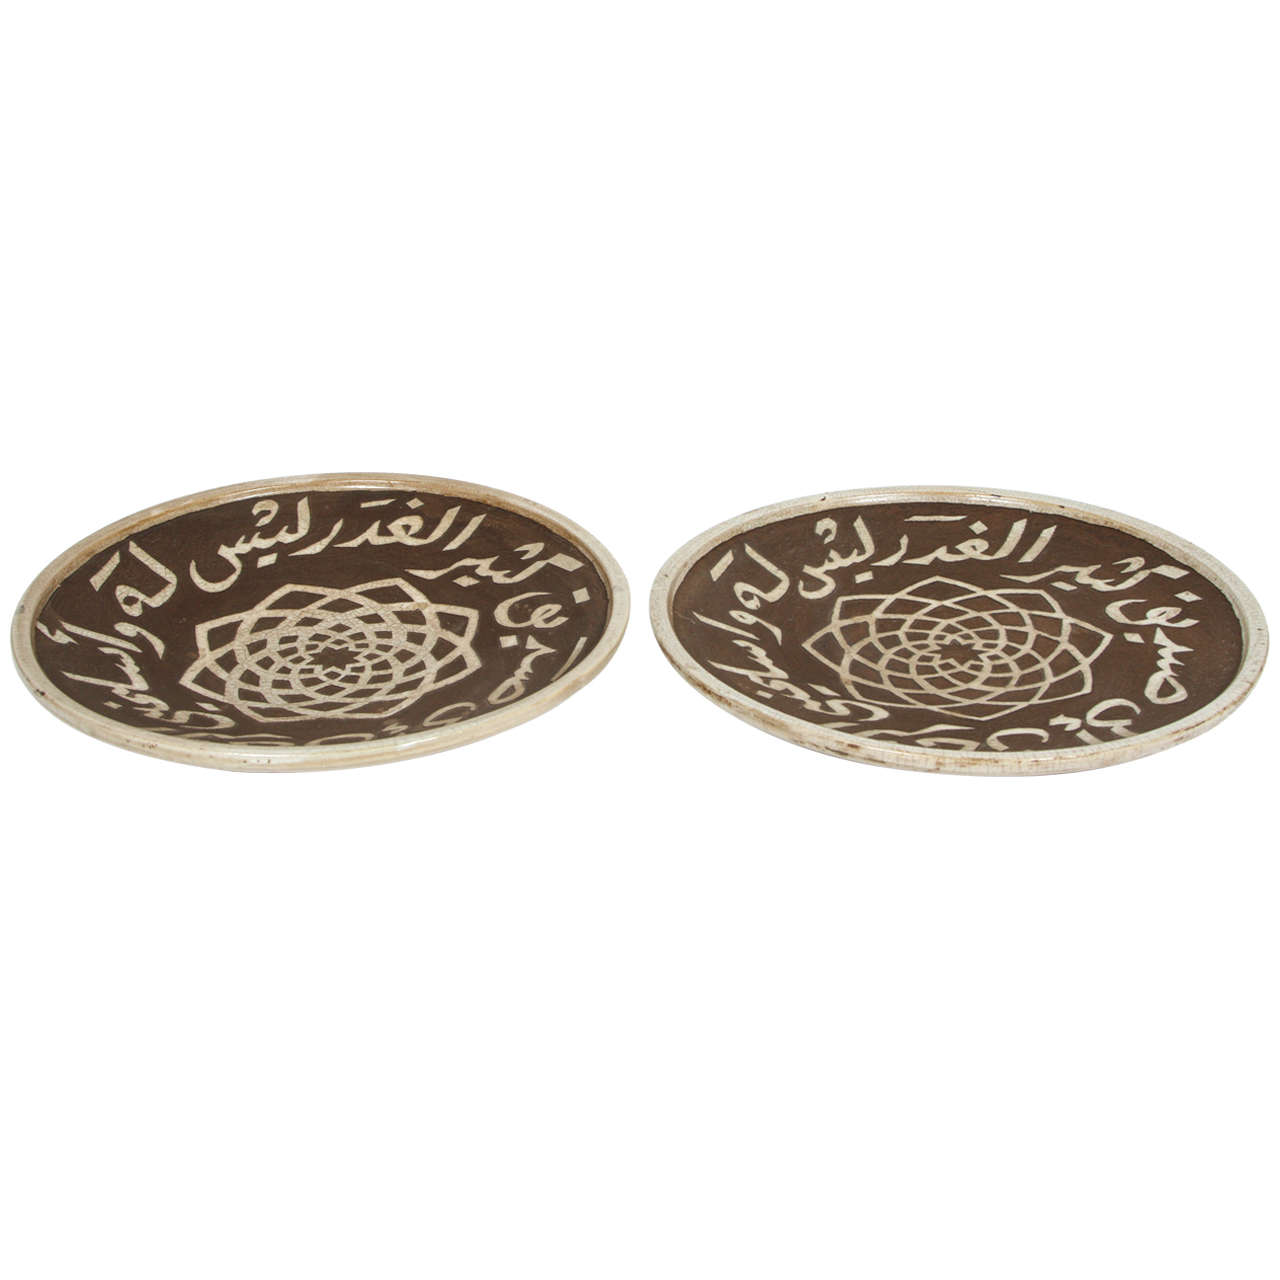 Moroccan Ceramic Plates Chiselled with Arabic Calligraphy Scripts Set of 2 For Sale